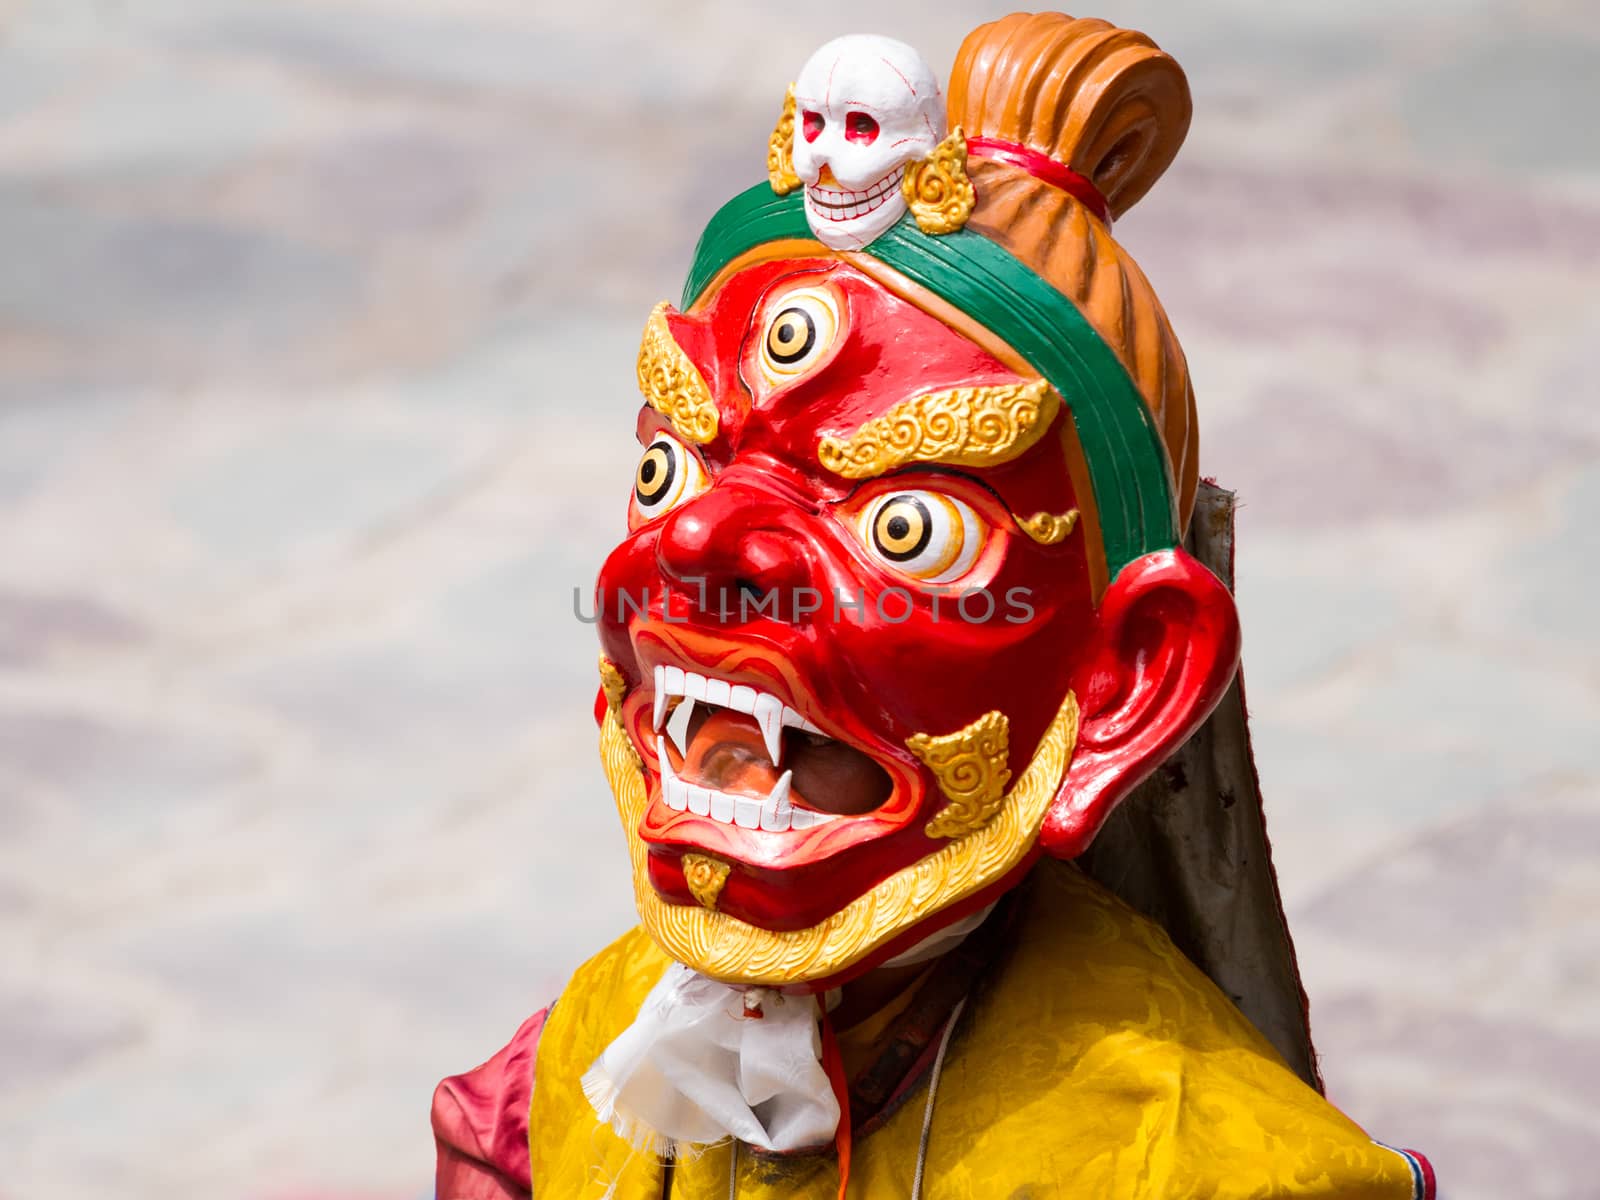 Monk performs a religious masked and costumed mystery dance of Tibetan Buddhism during the Cham Dance Festival by straannick